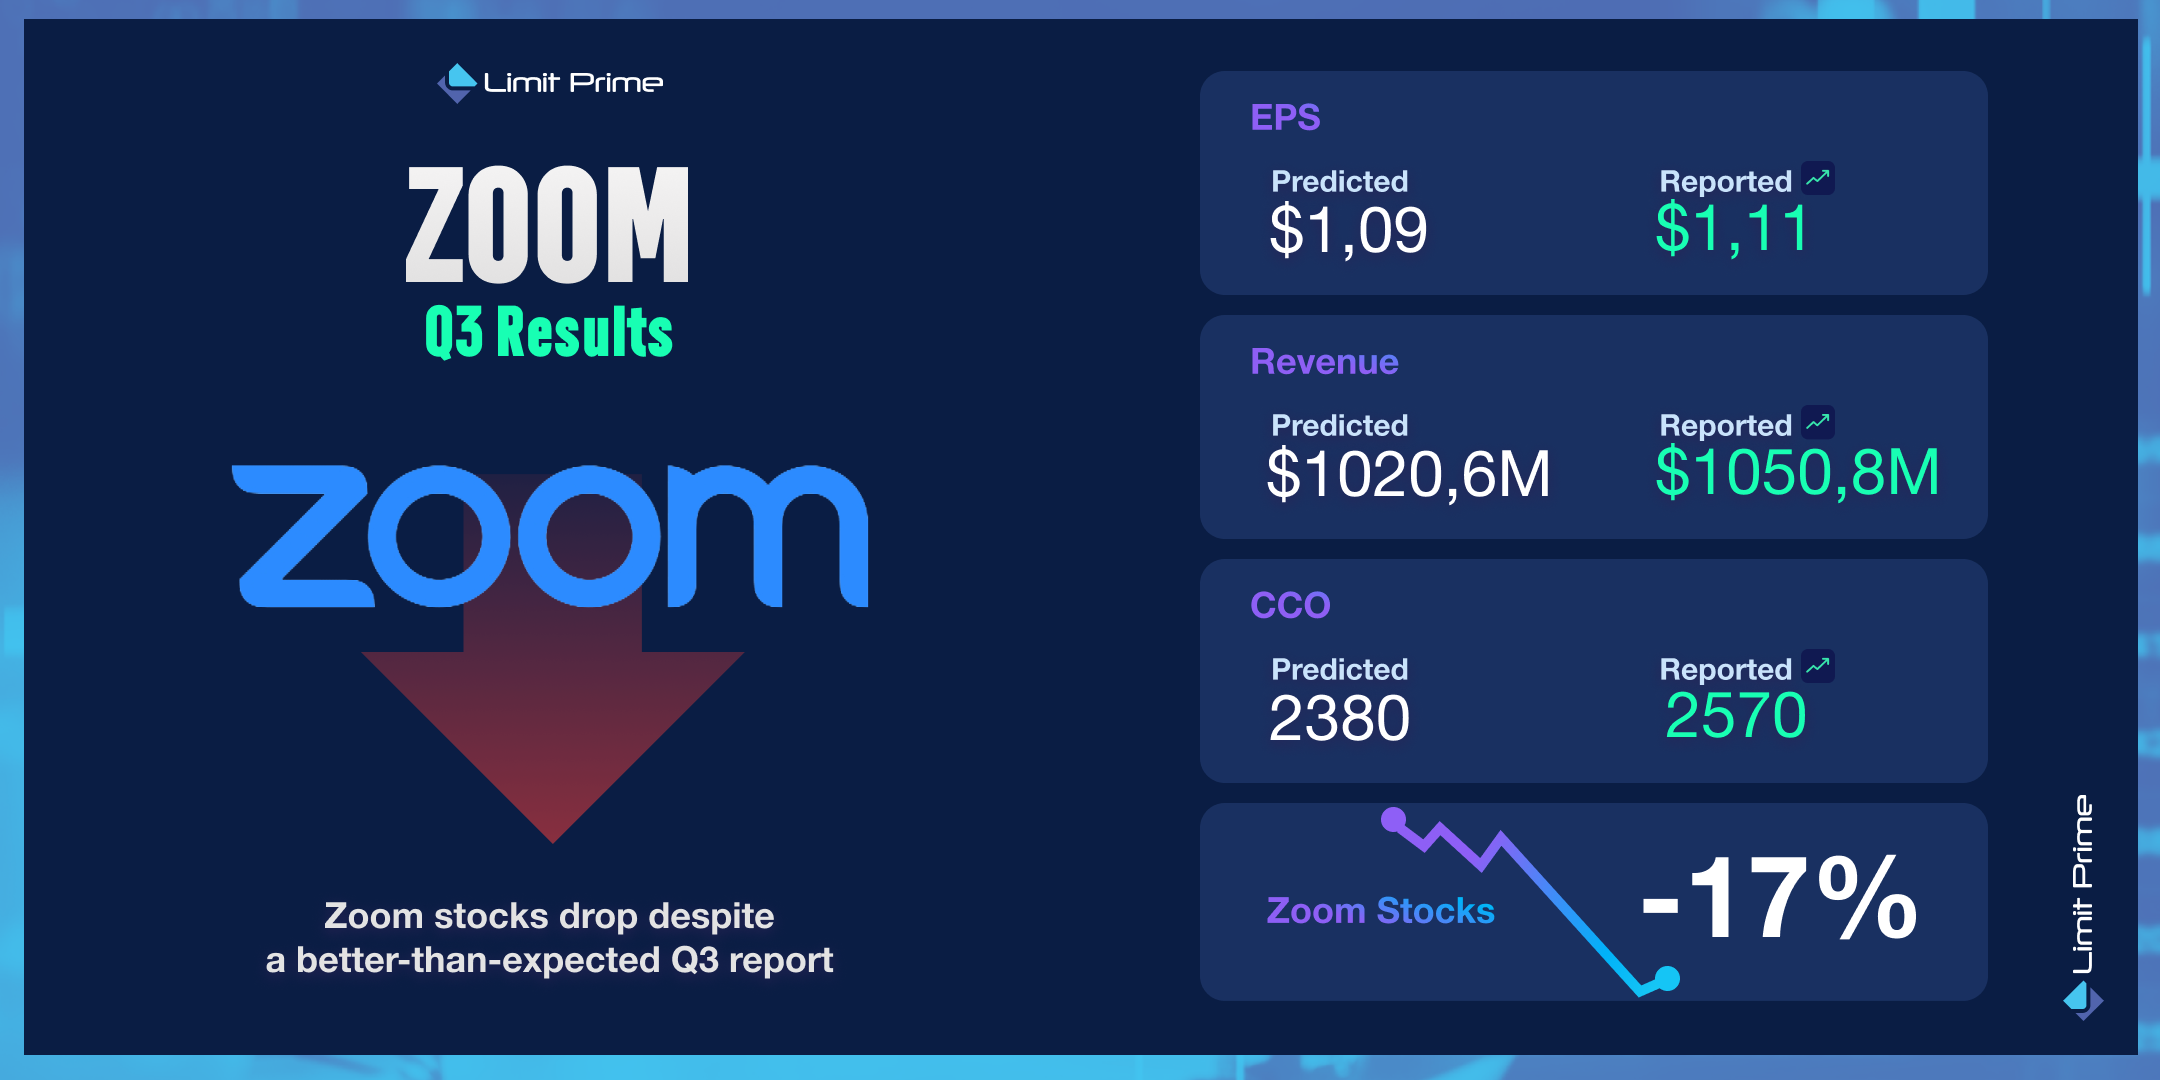 Zoom - Q3 Results